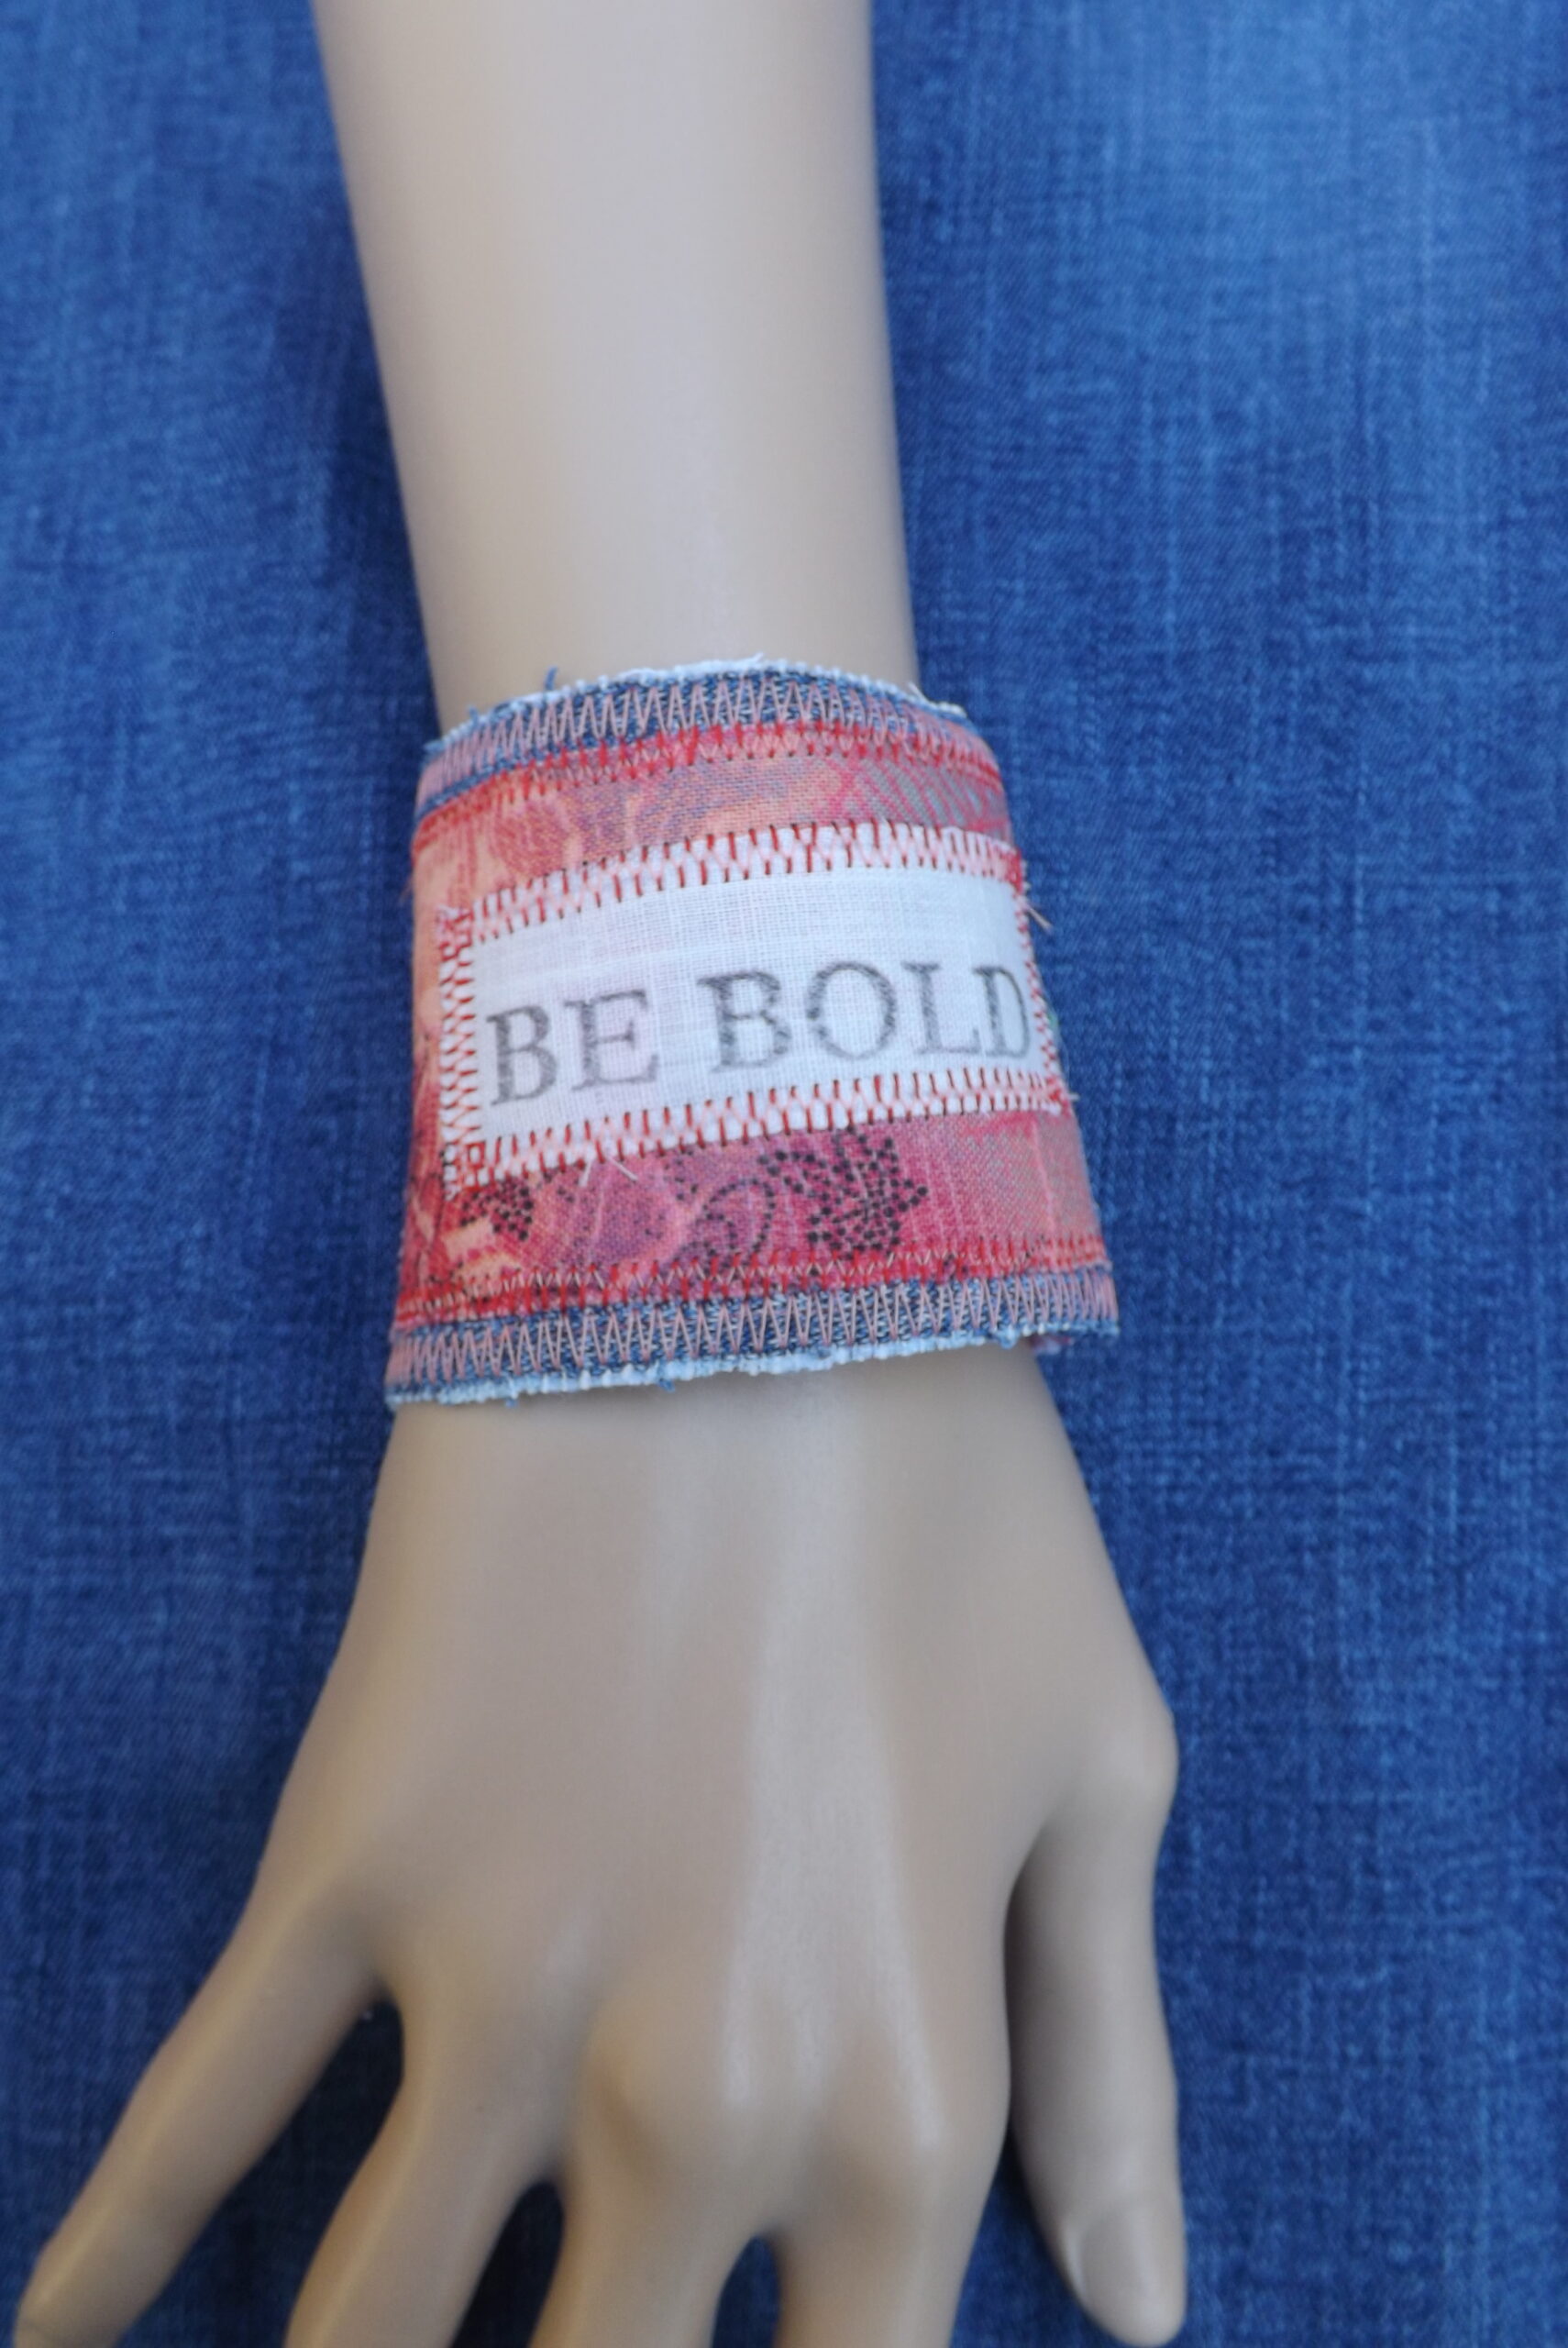 Scrappy denim cuff bracelet with Be Bold stamped upon it.